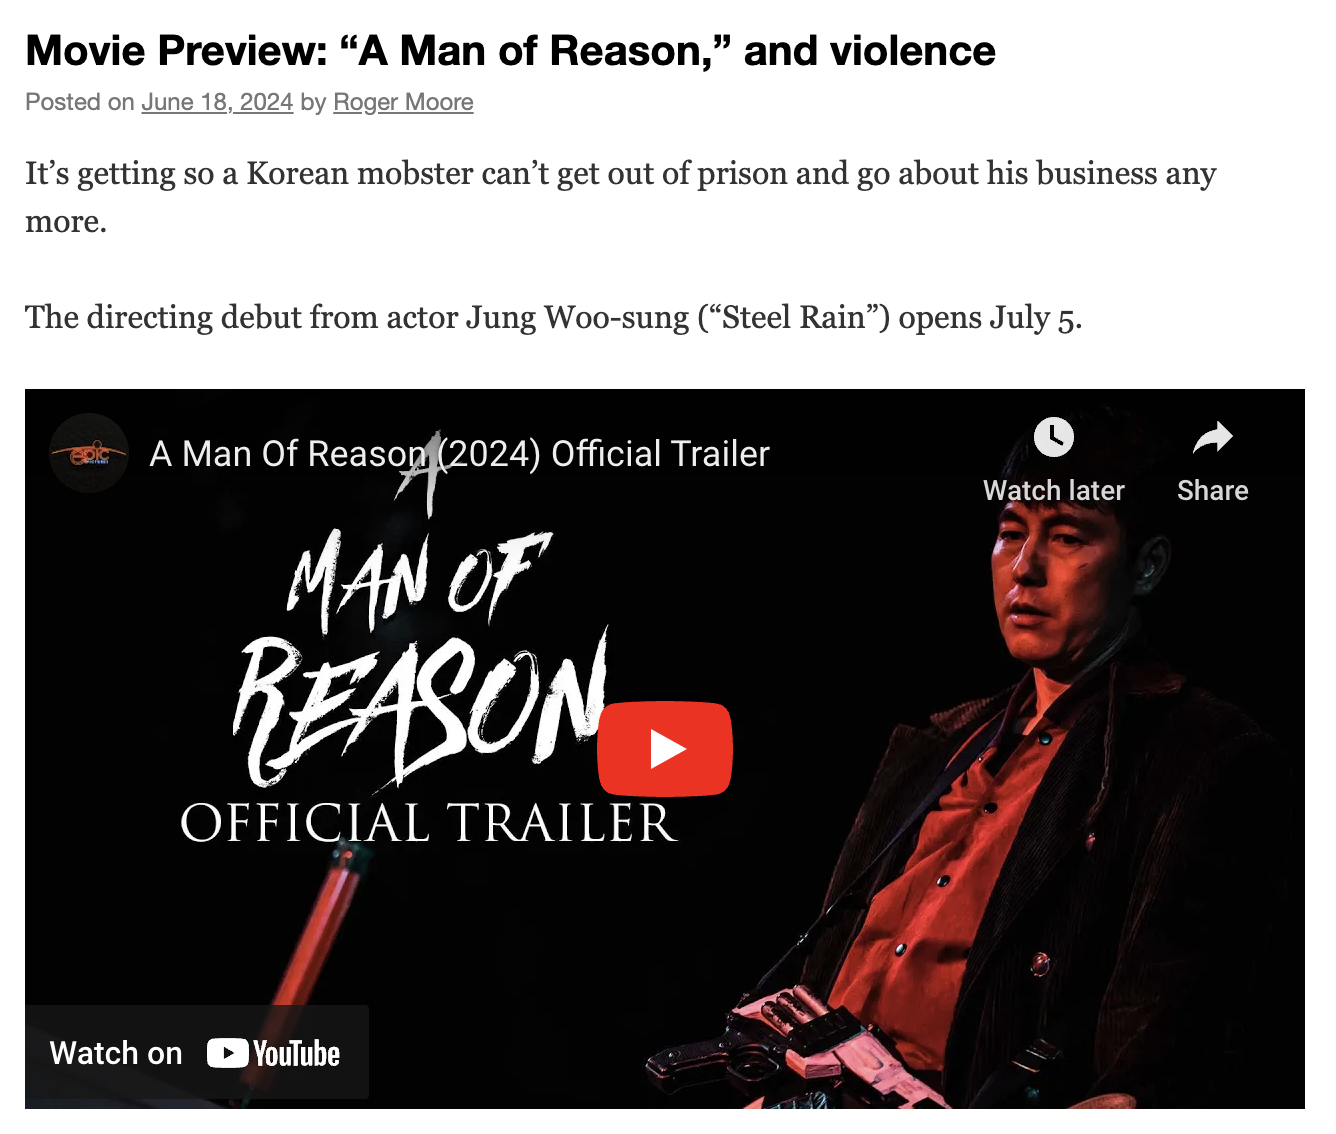 Movie Preview: “A Man of Reason,” and violence